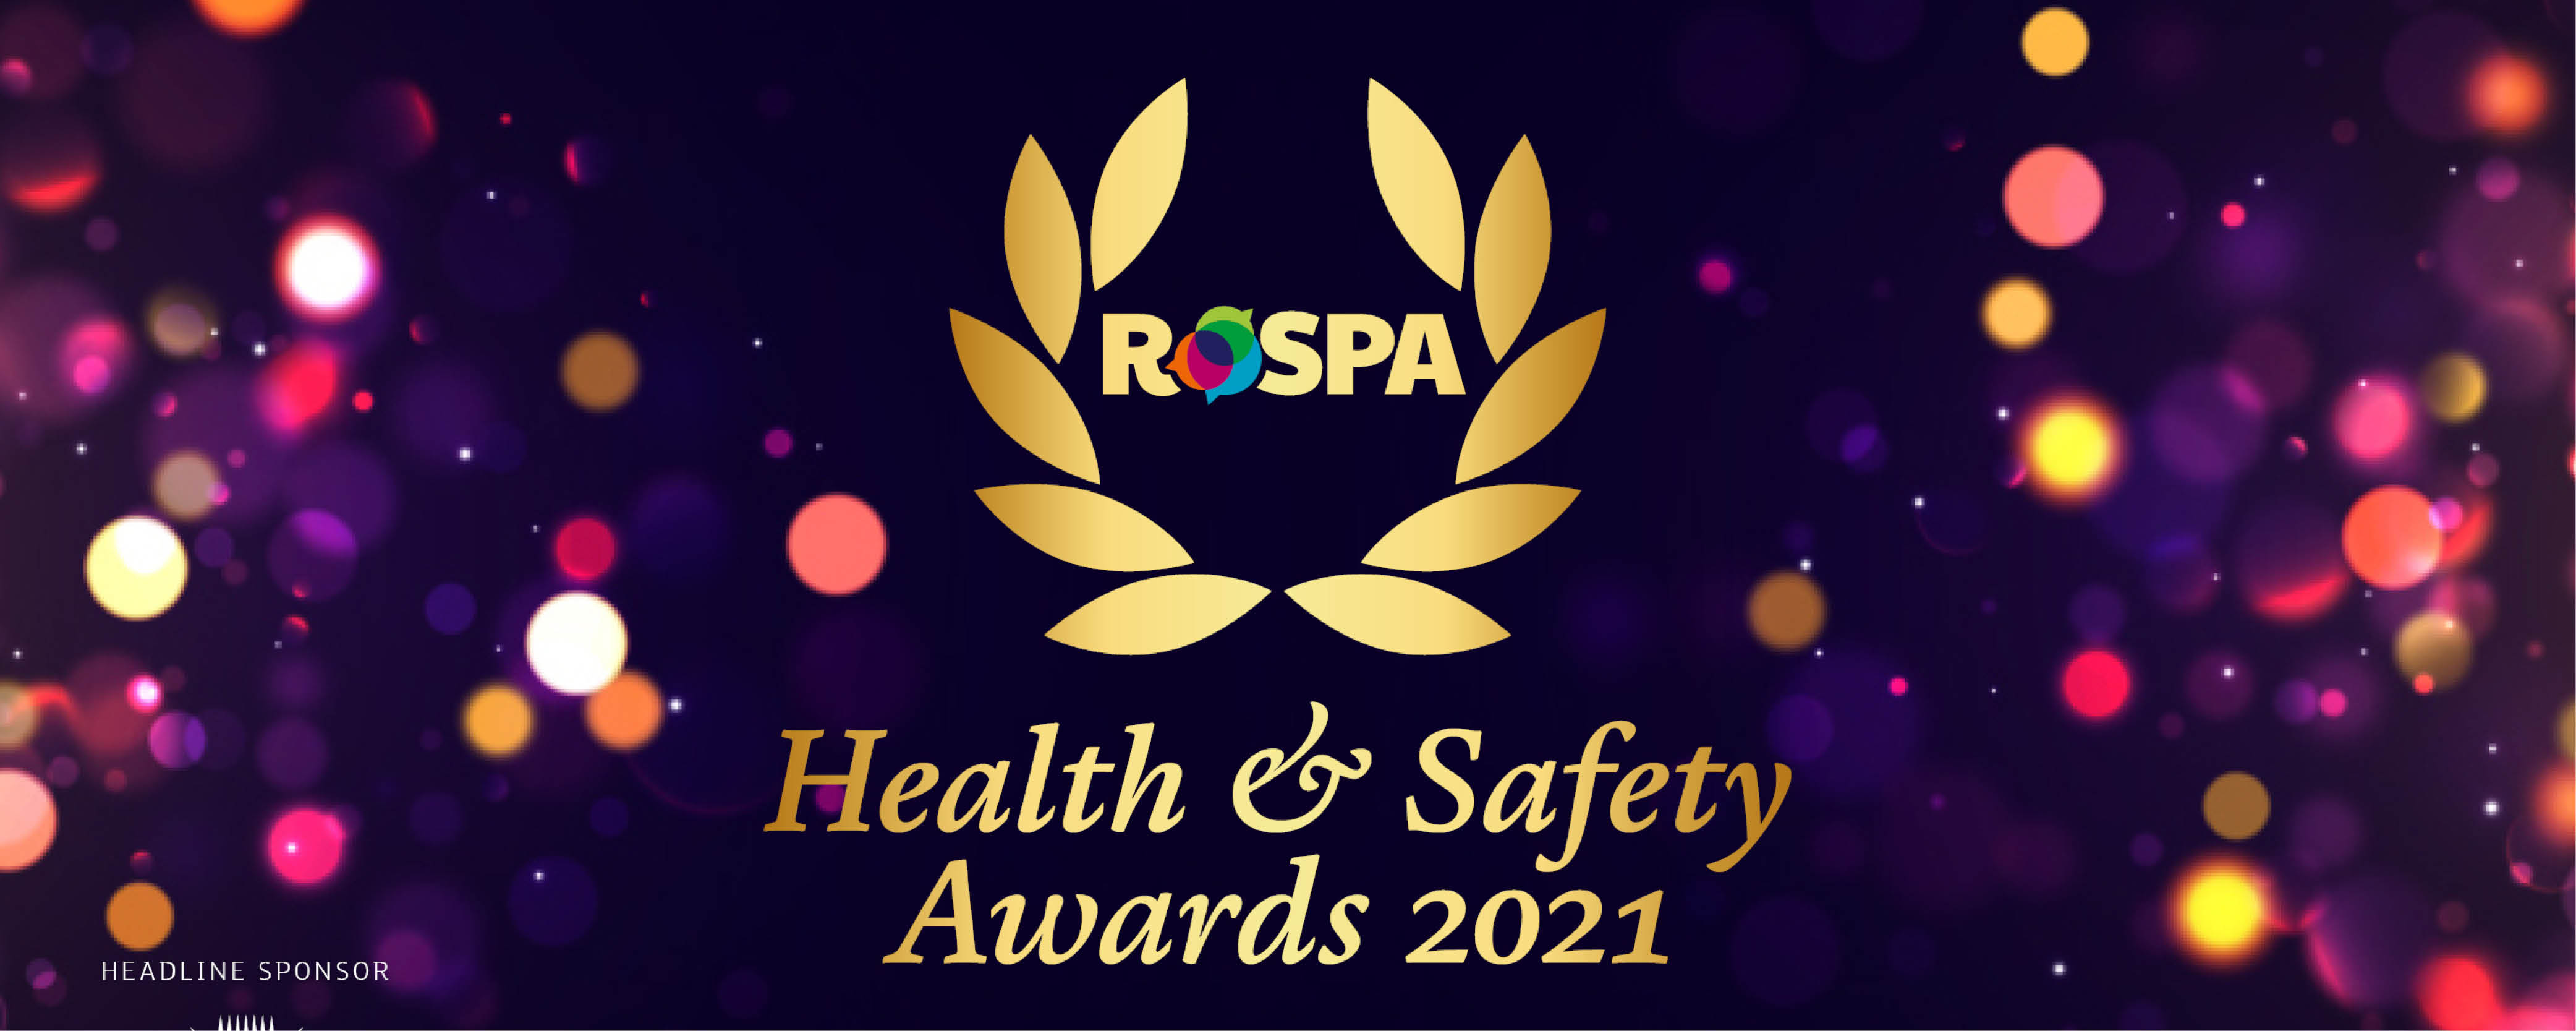 Milestone Infrastructure Secures RoSPA Gold Award for Street Lighting Operations